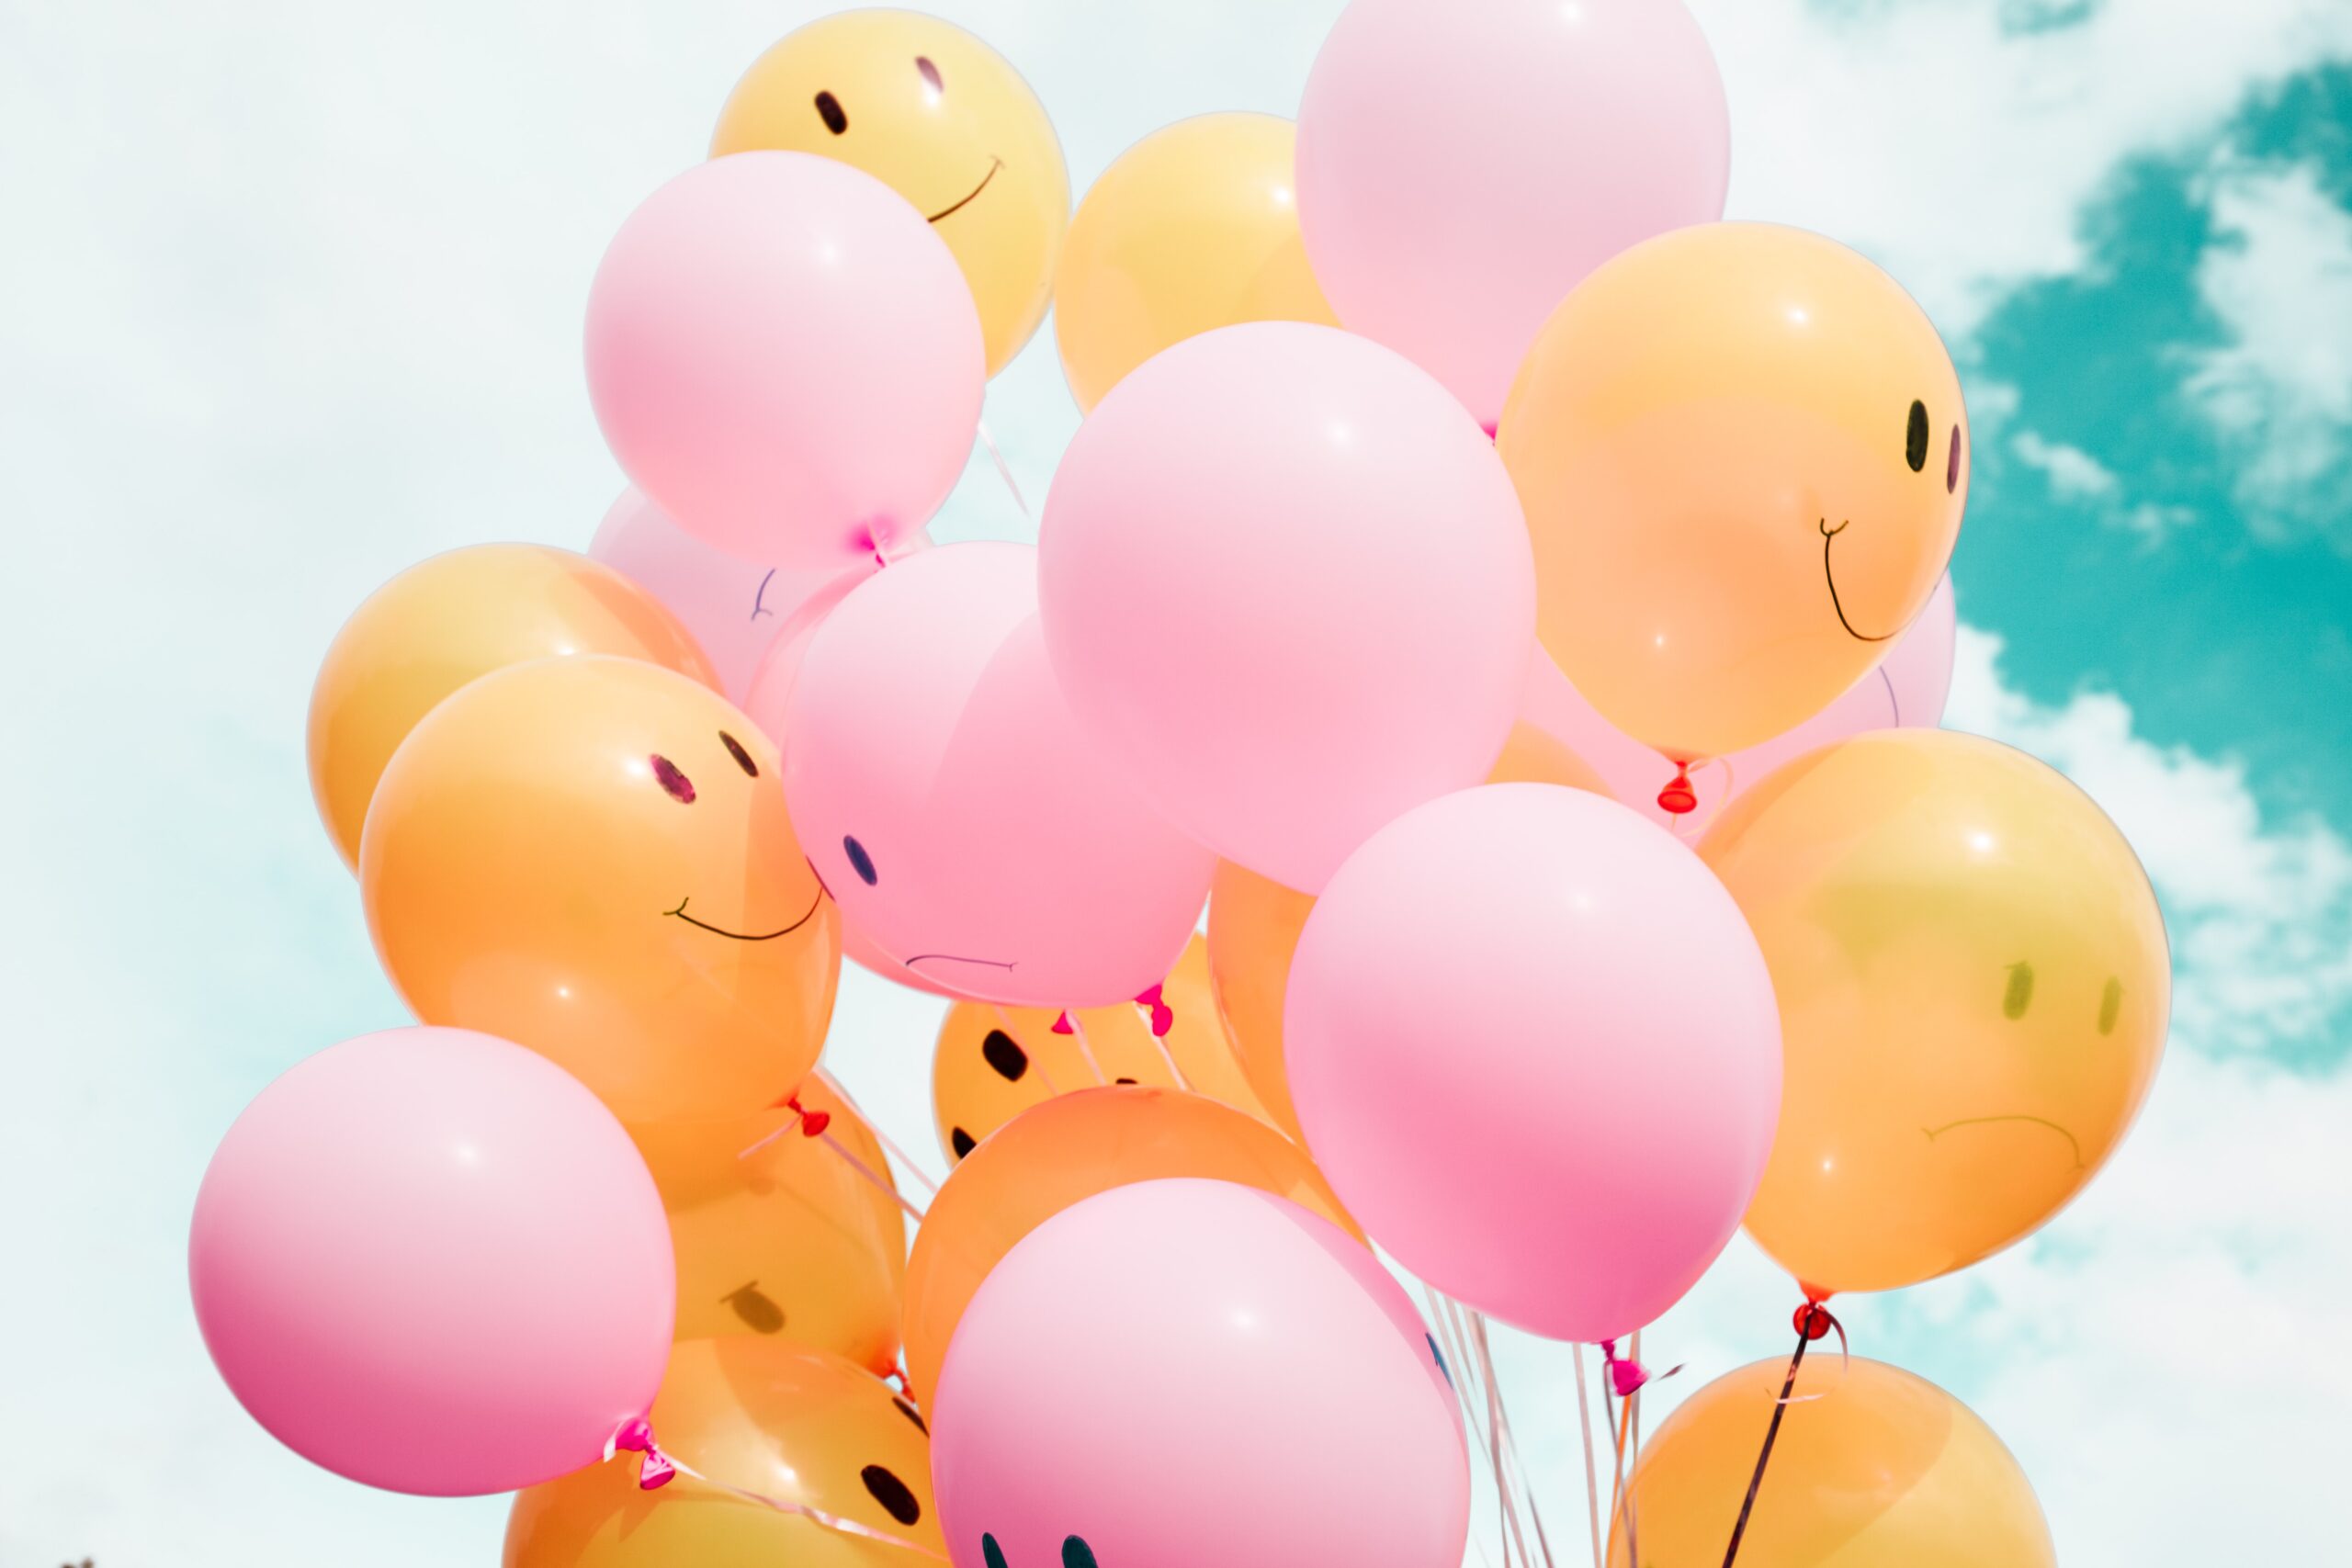 smiley faces on balloons